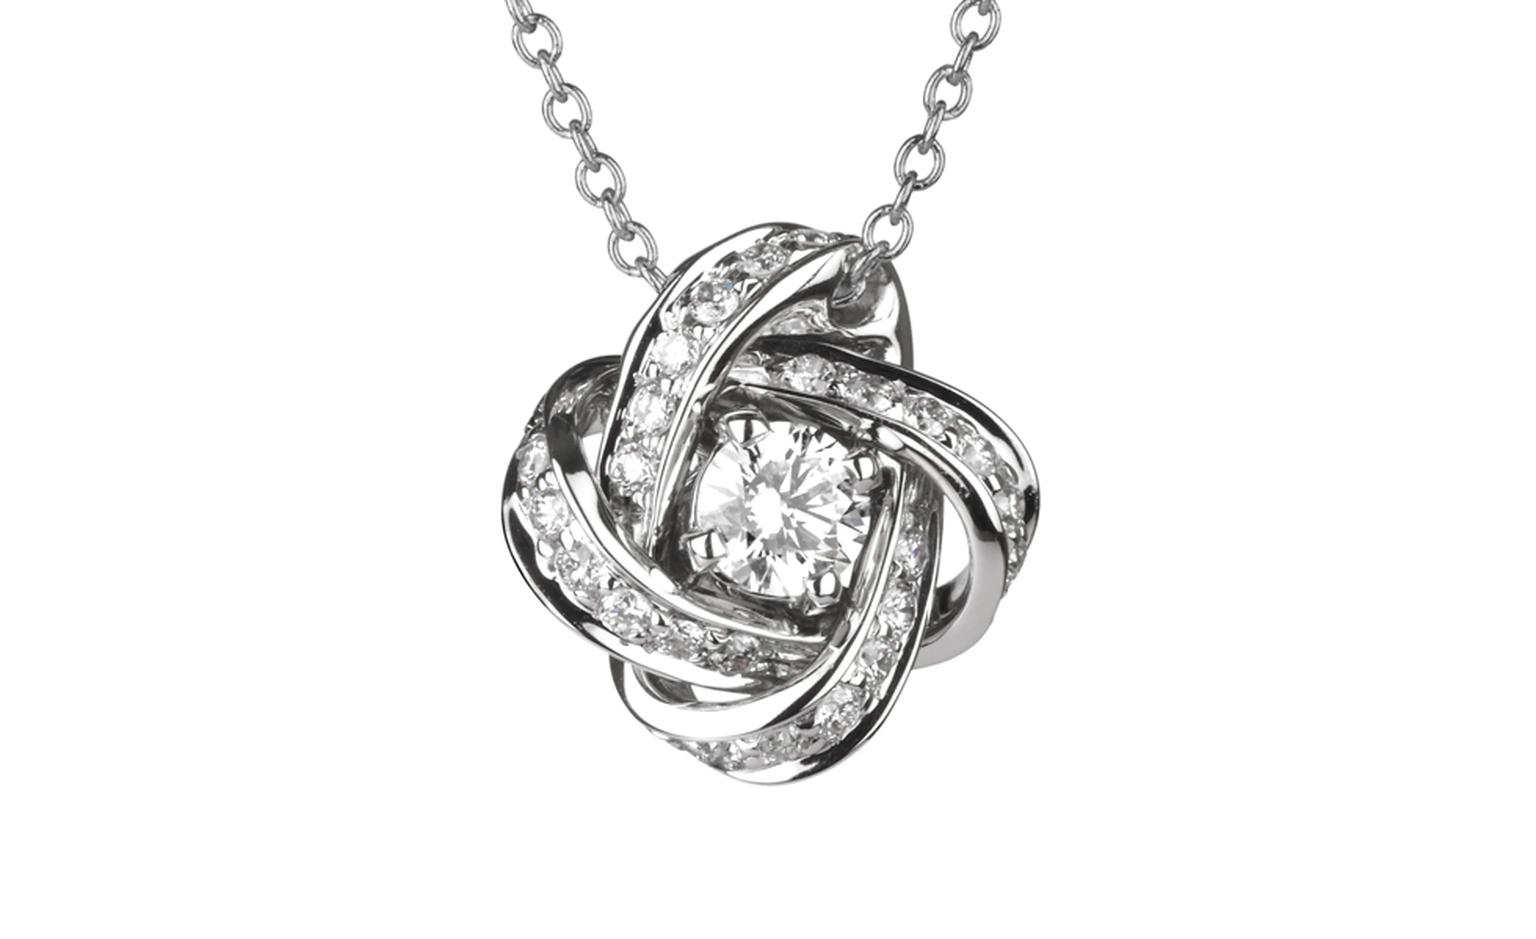 BOUCHERON, Ava Pivoine Pendant in white gold paved with diamonds. Price from £2,760